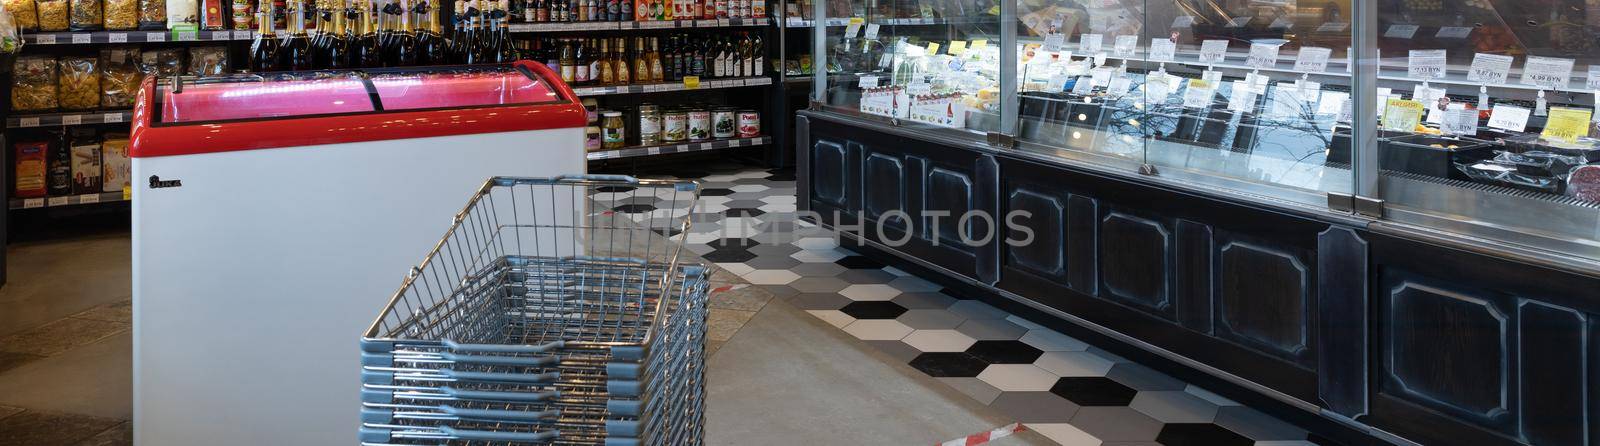 Minsk, Belarus - Dec 20, 2021: interior of a small cozy store with a large refrigerated display case and shelves on the wall by TRMK